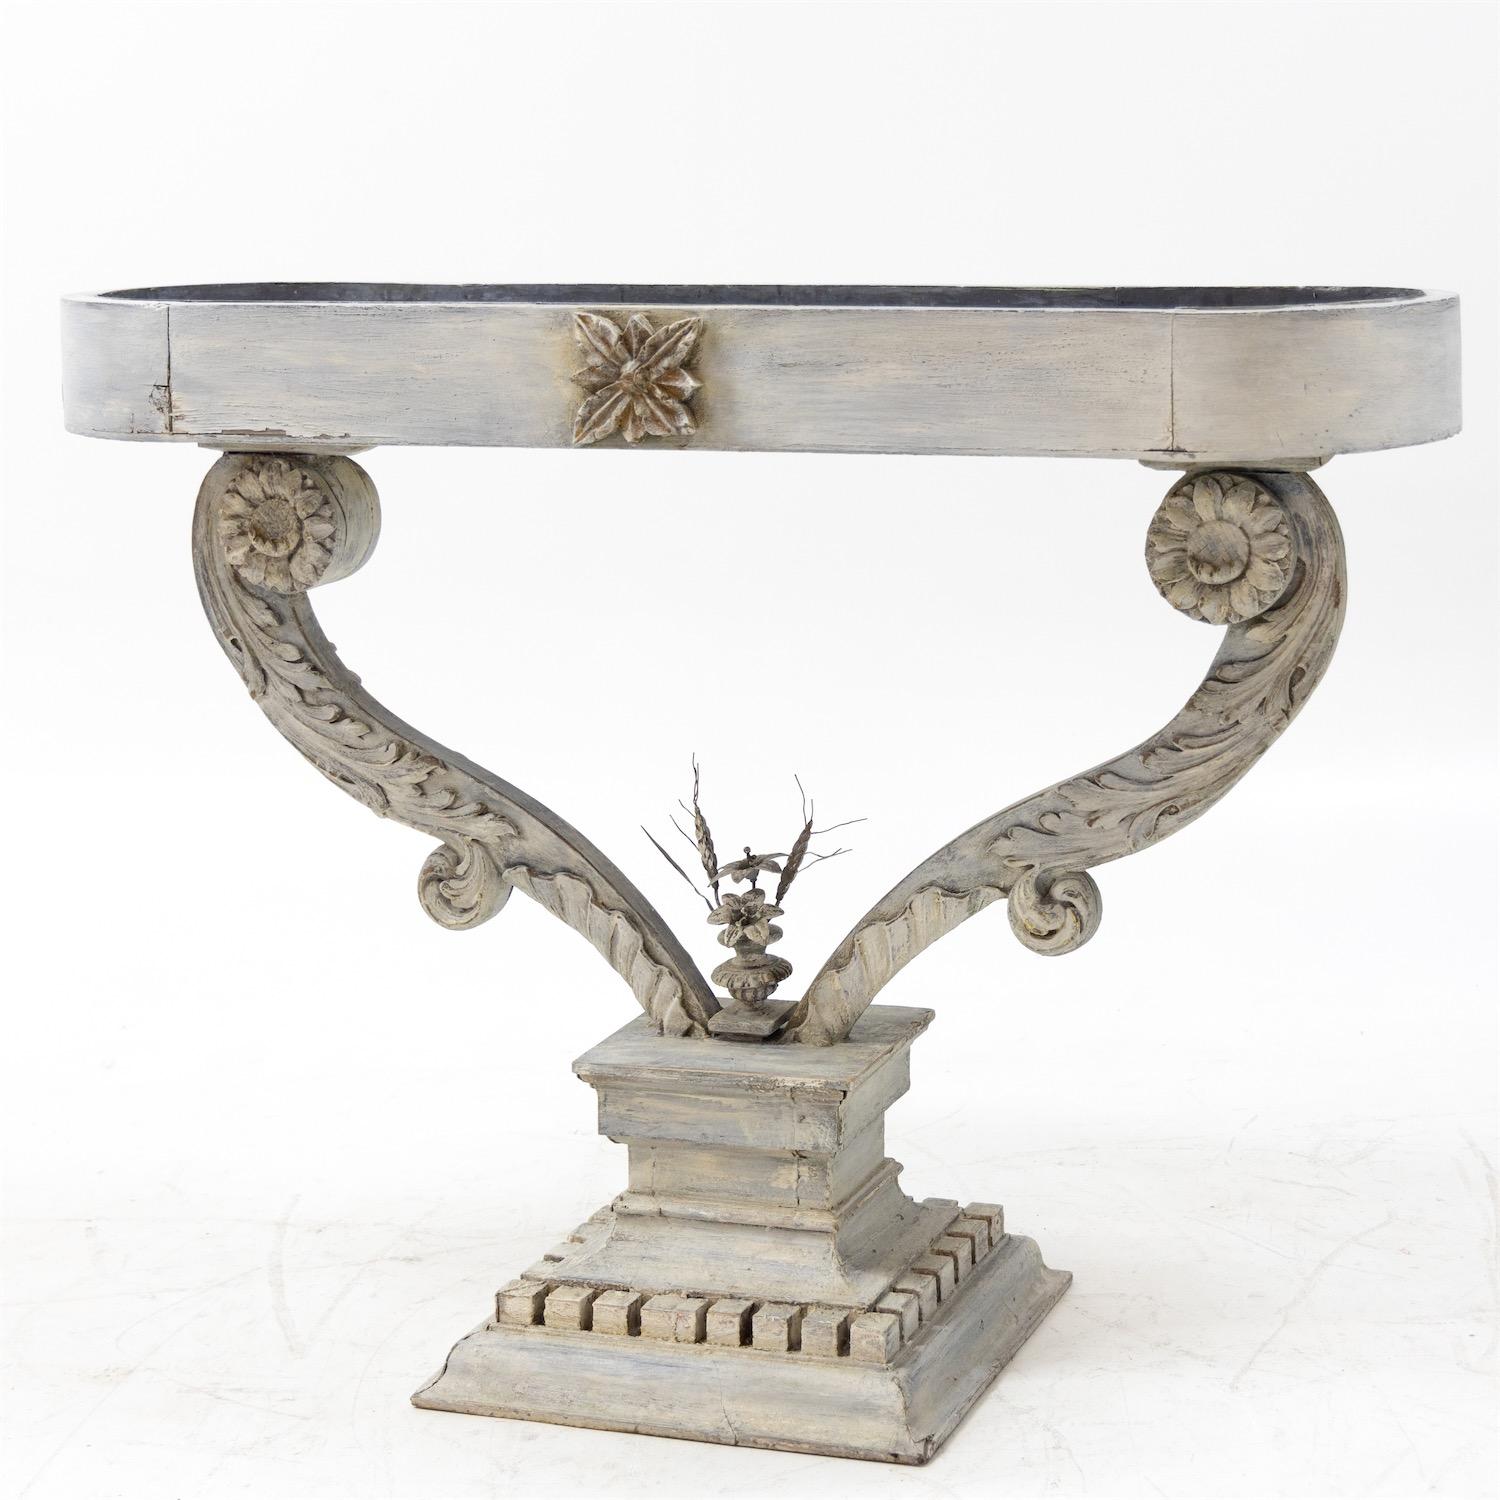 Jardinière set in a light grey color with an oval-shaped planter on carved rocaille supports above a square, multi-stepped pedestal with dentils. In the centre a small flower bouquet of tin and wire. With a tin basin.